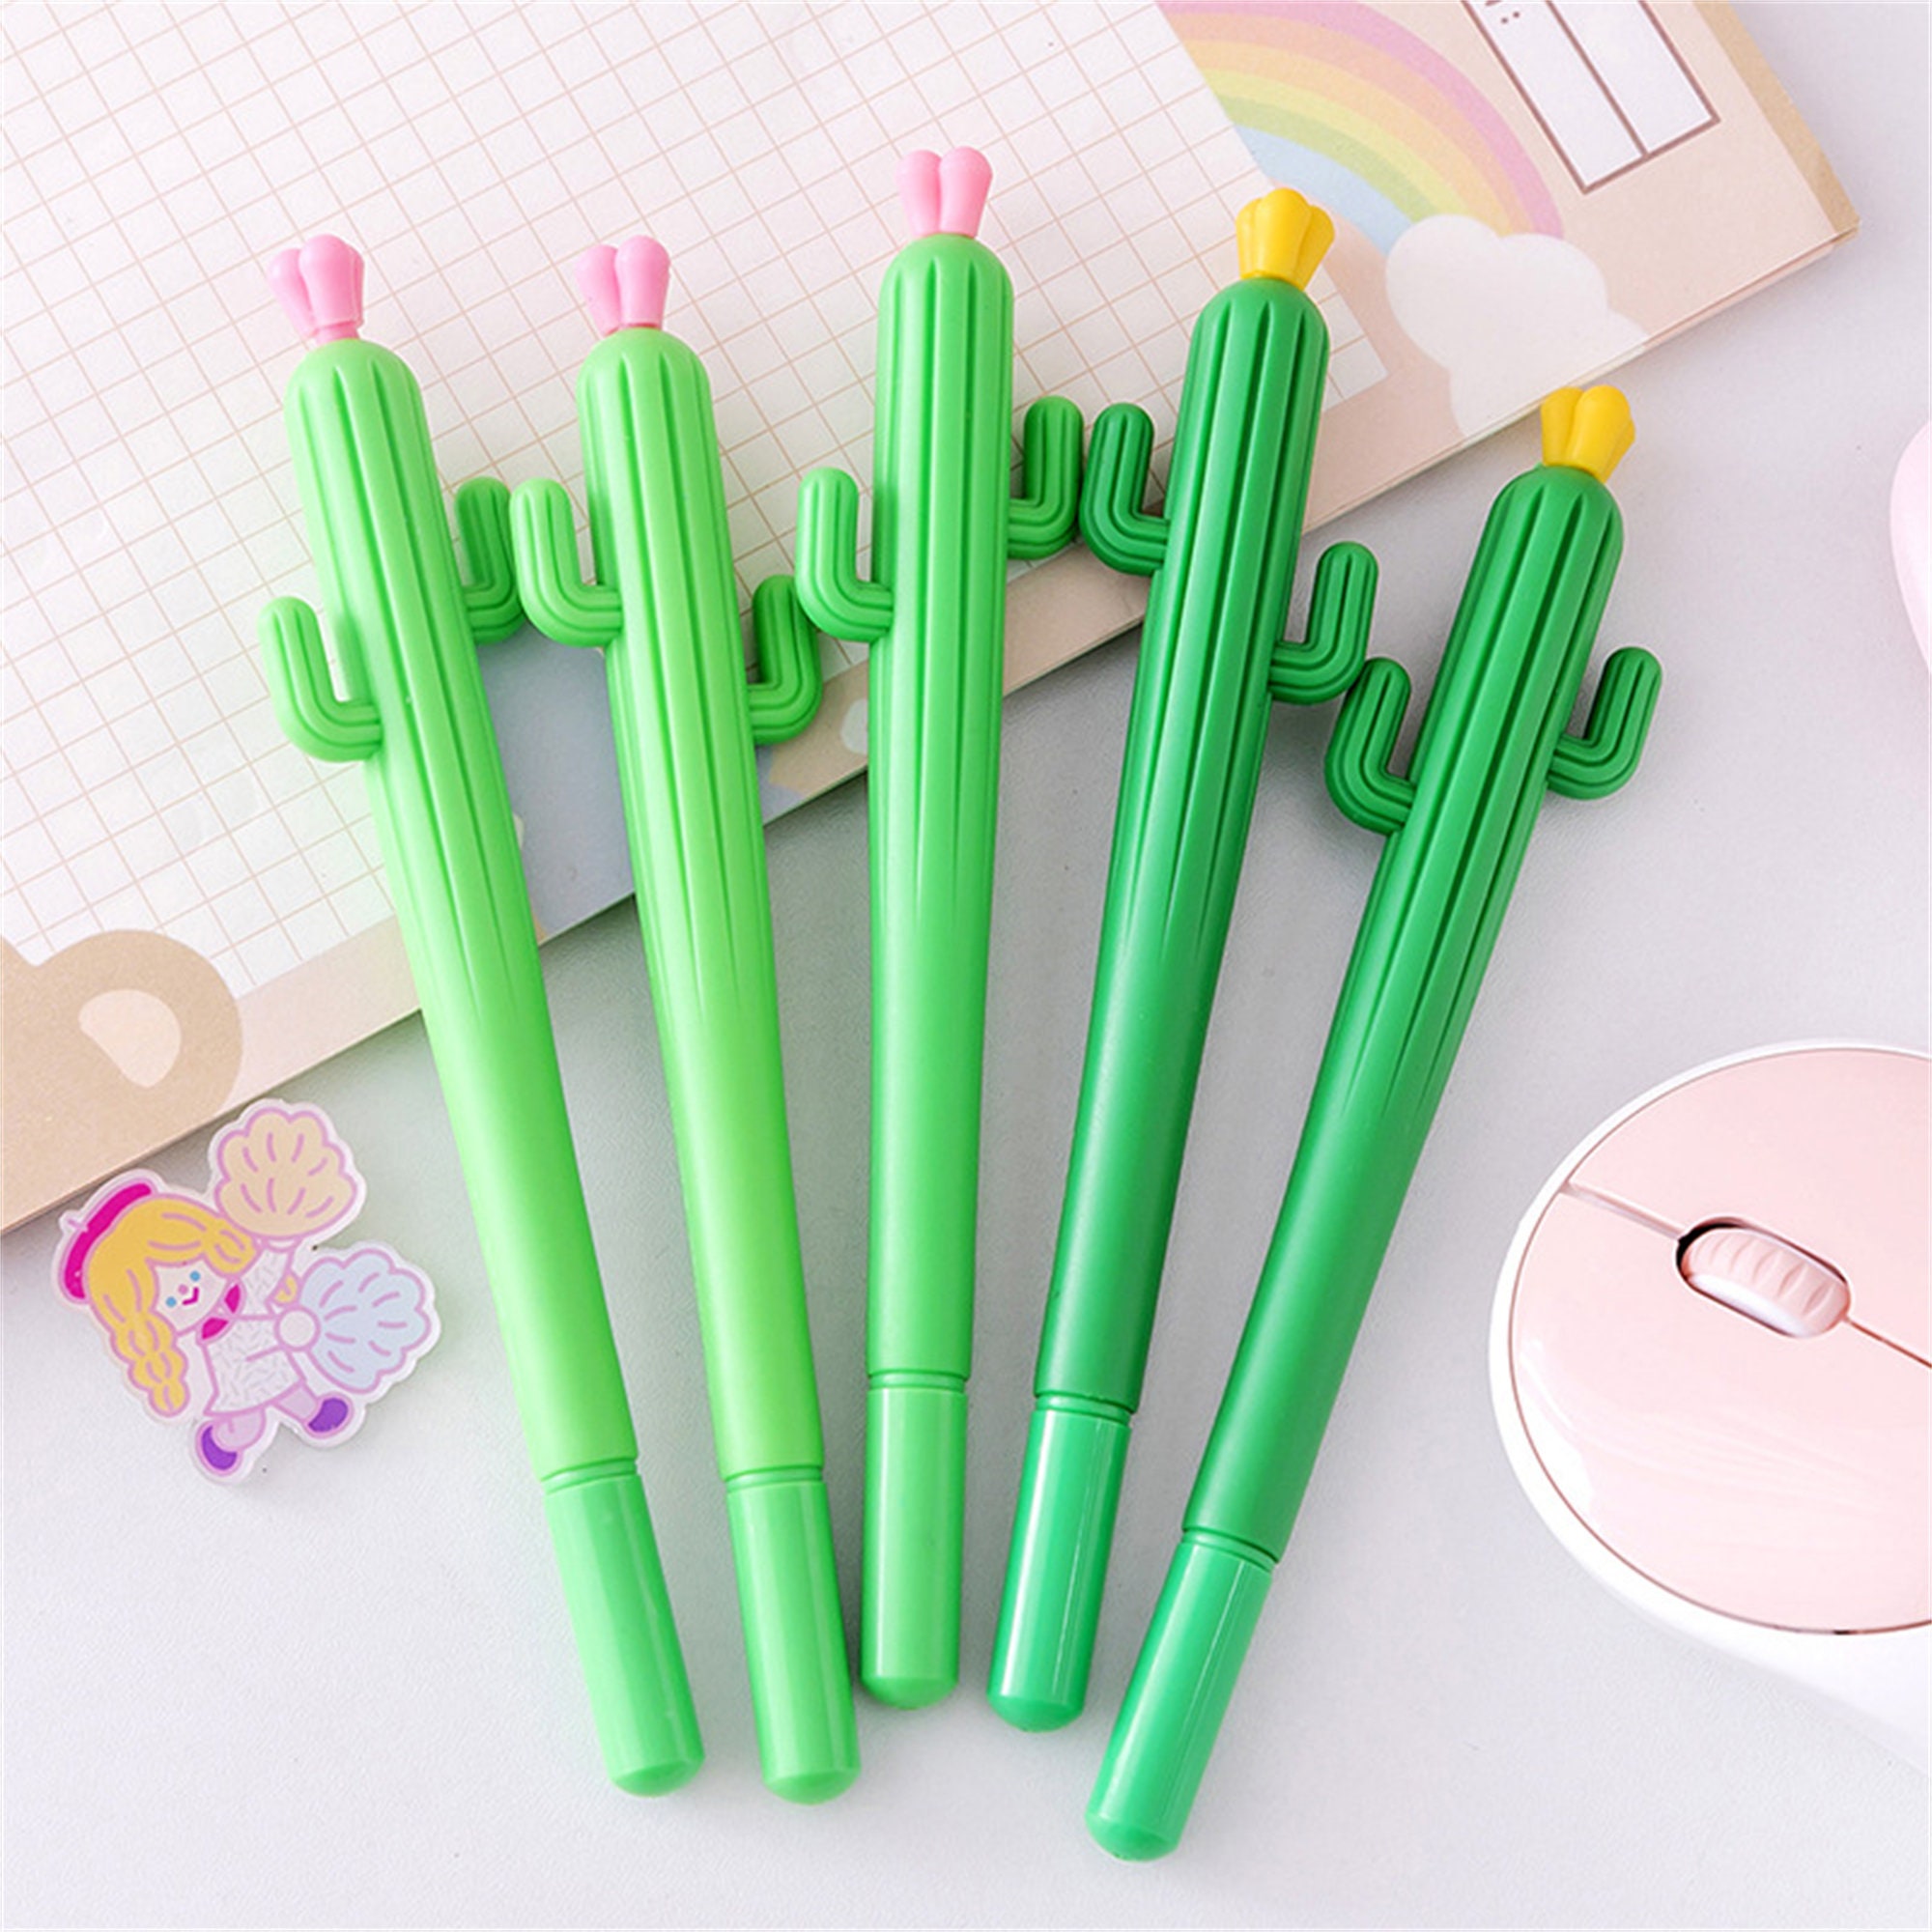 Pen with Plush Cactus by Mr. Wonderful